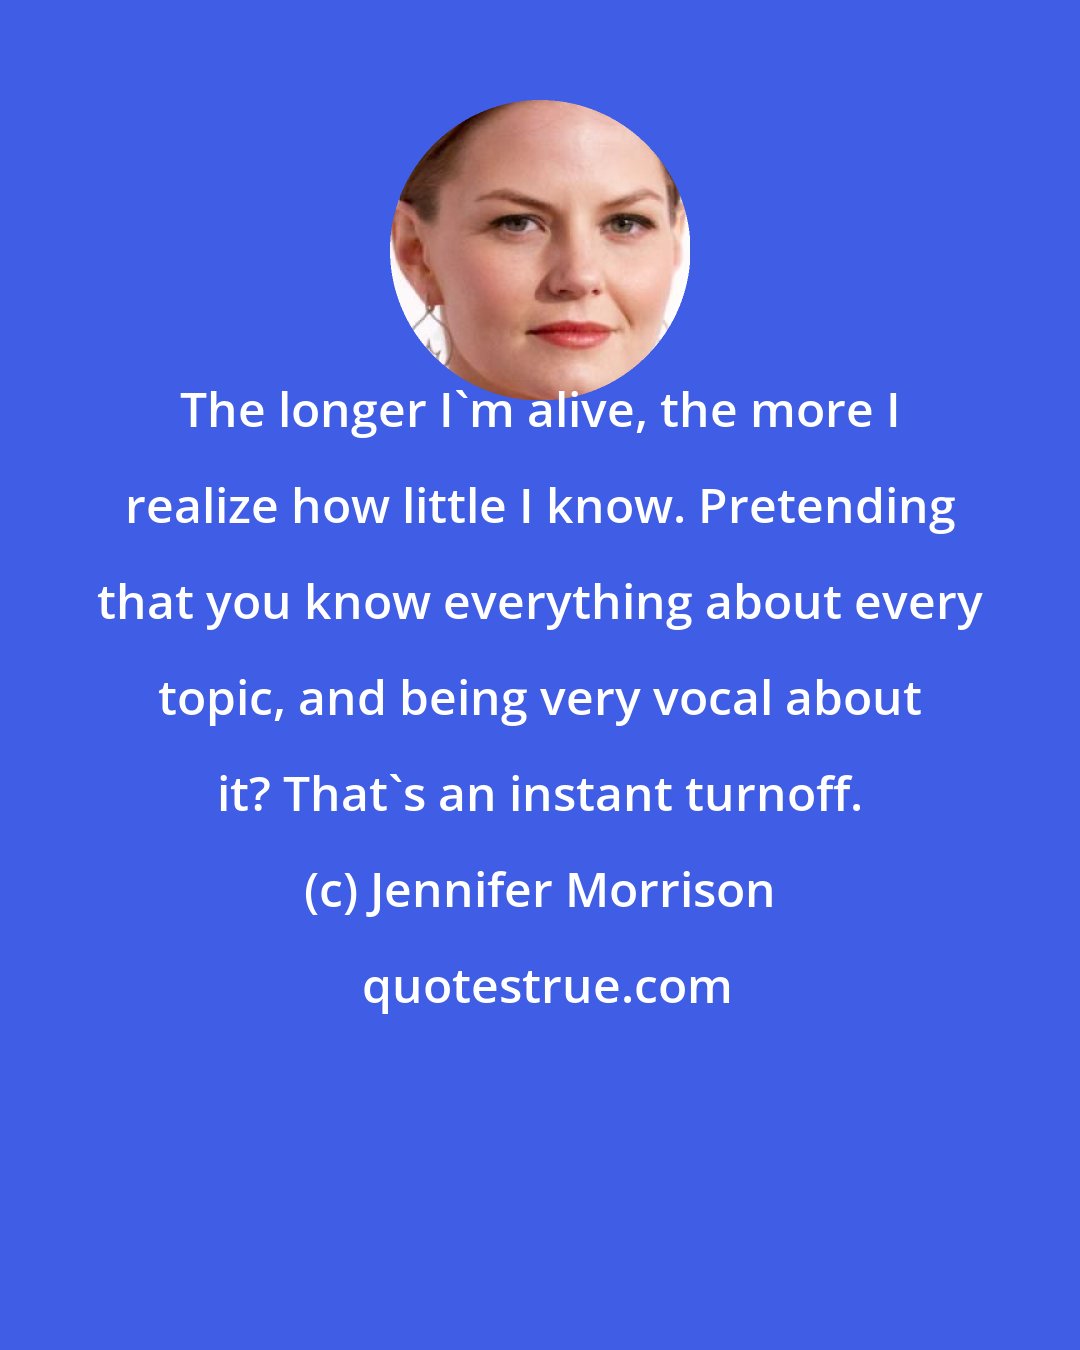 Jennifer Morrison: The longer I'm alive, the more I realize how little I know. Pretending that you know everything about every topic, and being very vocal about it? That's an instant turnoff.